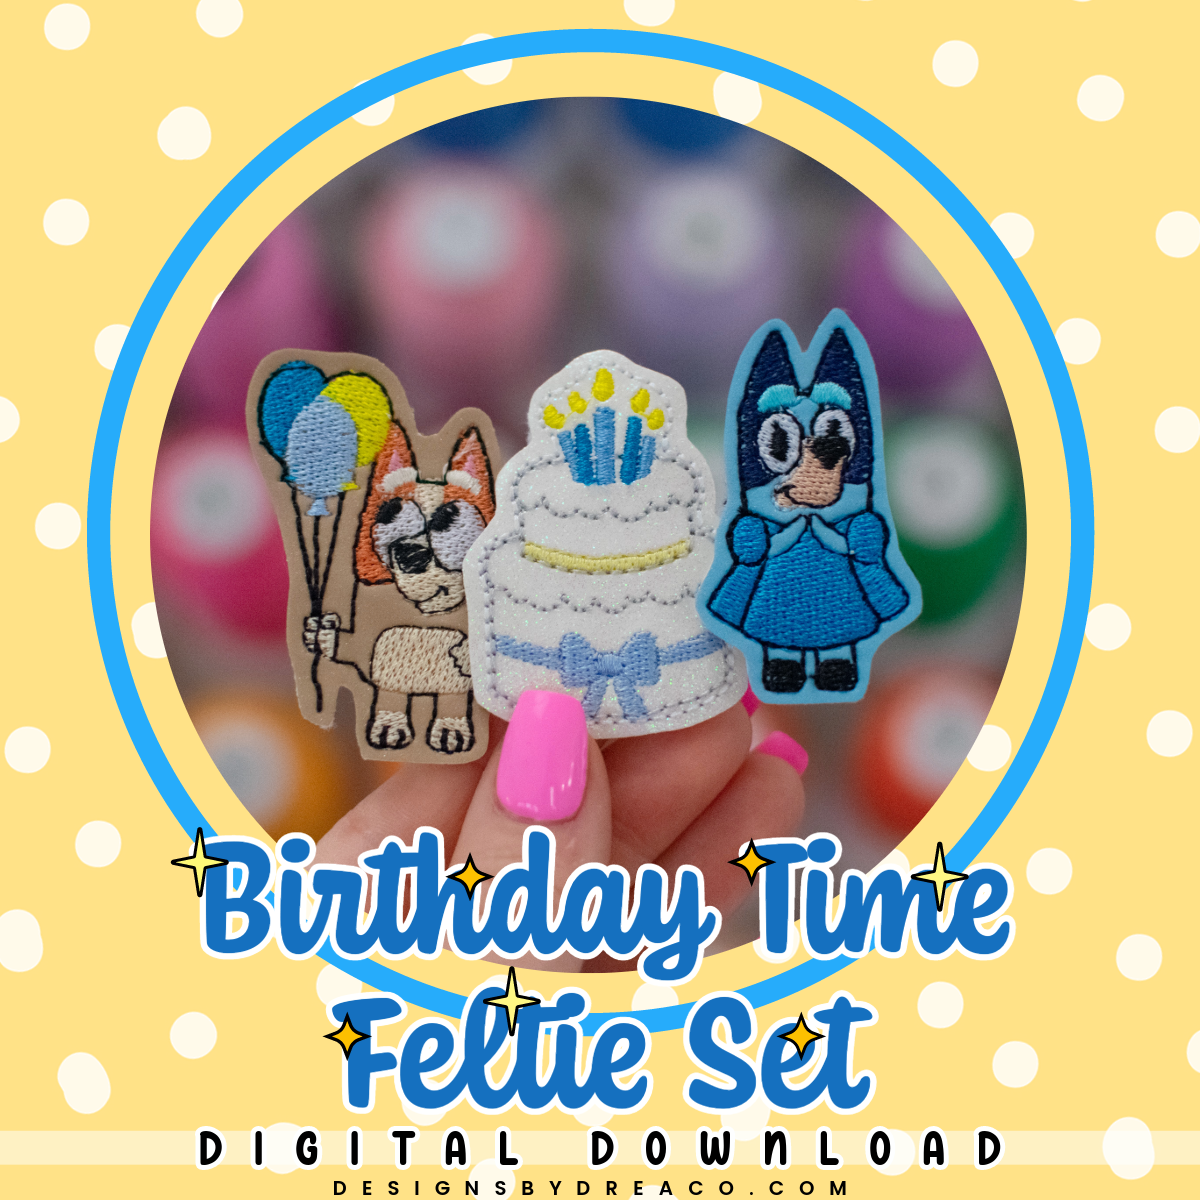 Birthday Time Embroidery Design Set